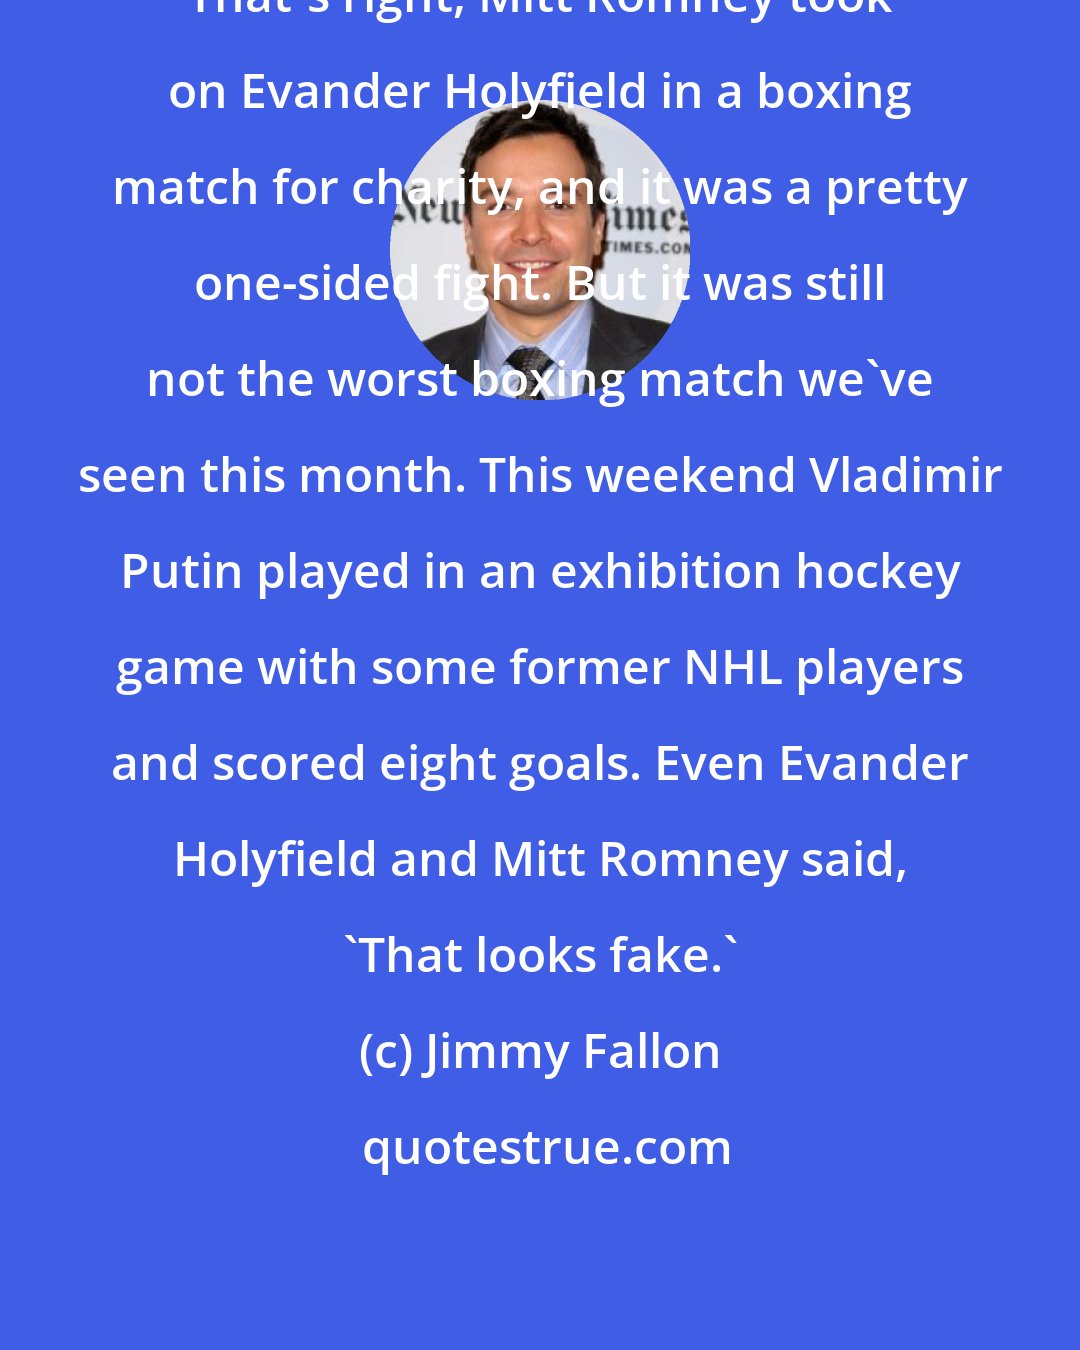 Jimmy Fallon: That's right, Mitt Romney took on Evander Holyfield in a boxing match for charity, and it was a pretty one-sided fight. But it was still not the worst boxing match we've seen this month. This weekend Vladimir Putin played in an exhibition hockey game with some former NHL players and scored eight goals. Even Evander Holyfield and Mitt Romney said, 'That looks fake.'